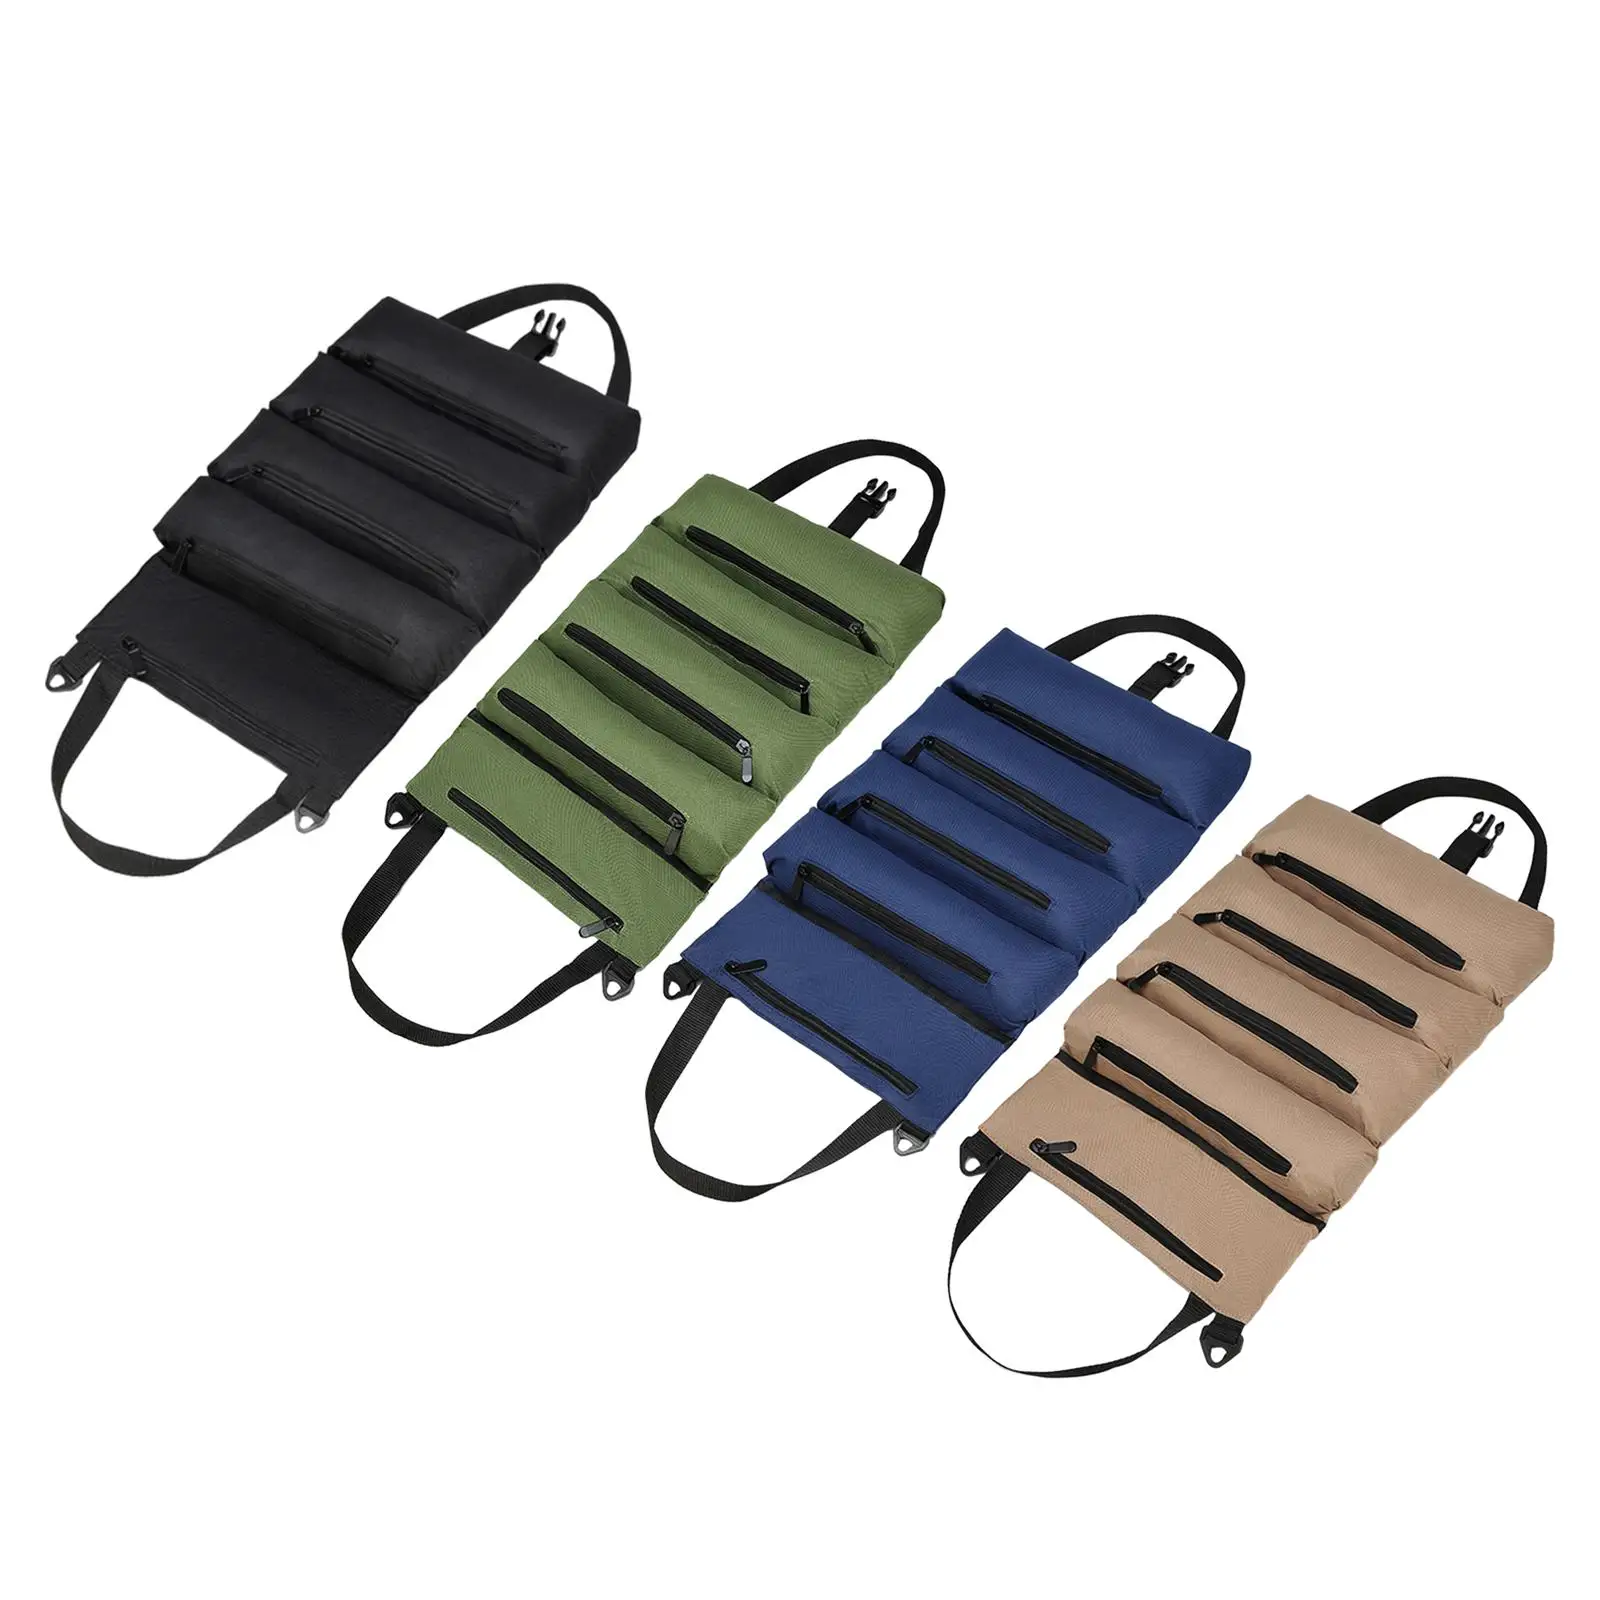 Tool Roll Pouch Multifunction Tool Organizer Oxford Cloth Roll up Tool Bag for Carpenter Handyman Electrician Home DIY Gardening